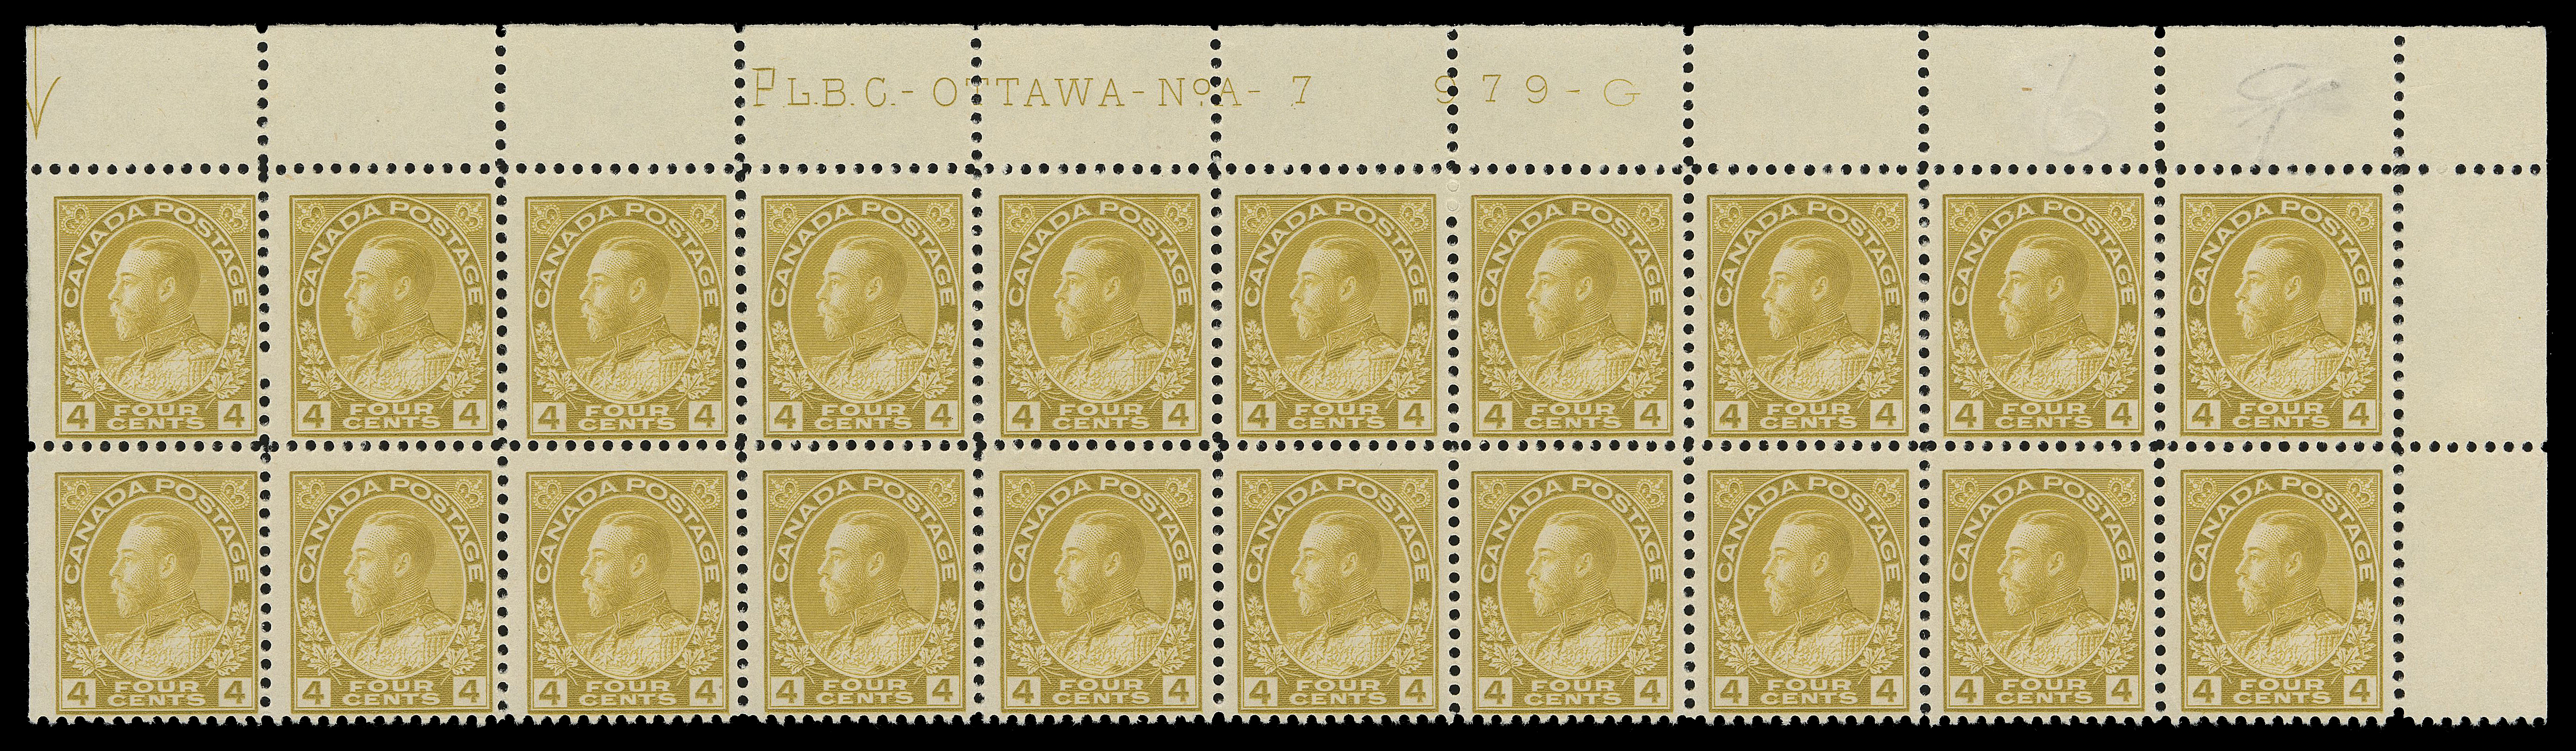 ADMIRAL STAMPS  110d,Upper right Plate 7 block of twenty, etched "P" by the engraver in front of "L.B.C.", erased pencil numbers at top right, hinged on top left stamp and in margin at right, nineteen stamps are NH, Fine and very scarce (Unitrade cat. $1,170)

Provenance: C.M. Jephcott, Maresch Sale 241, June 1990; Lot 781